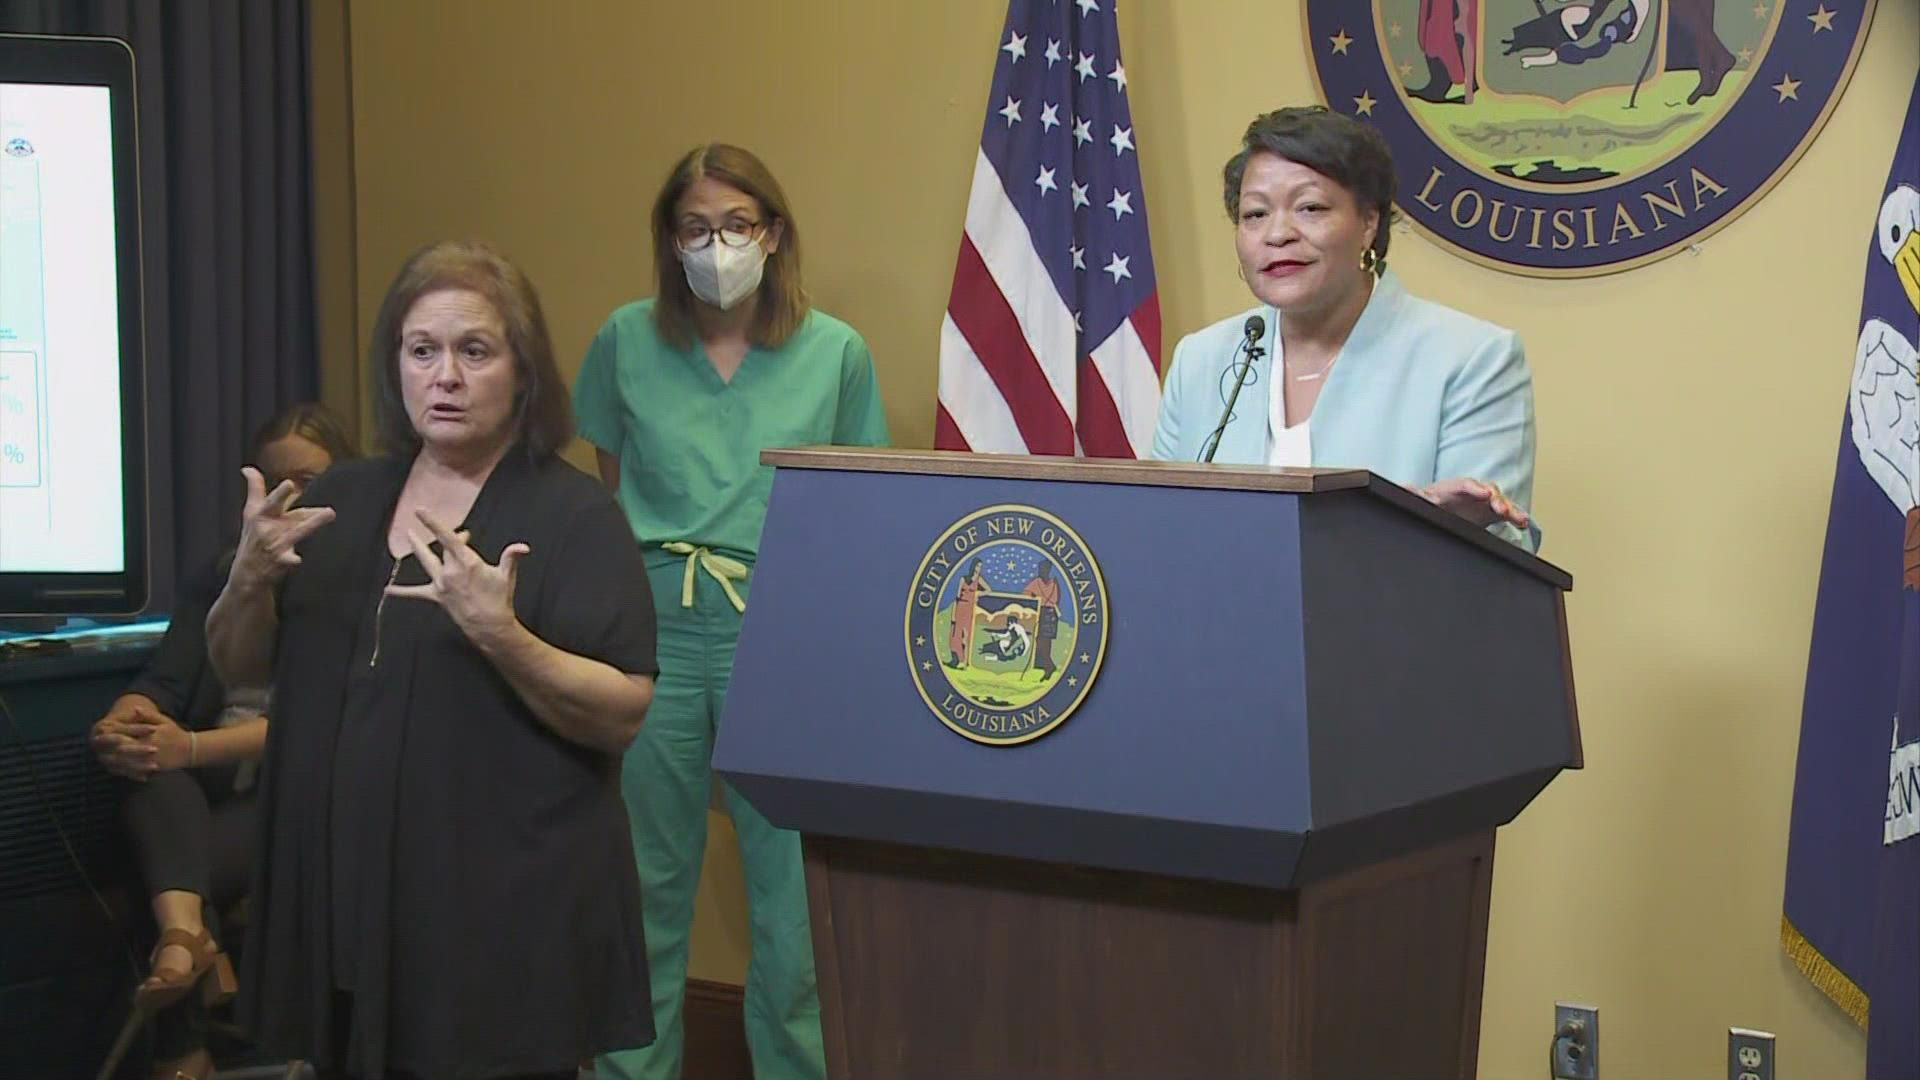 Mayor Cantrell has announced that people will need proof of vaccine or negative covid test too enter venues in the city.